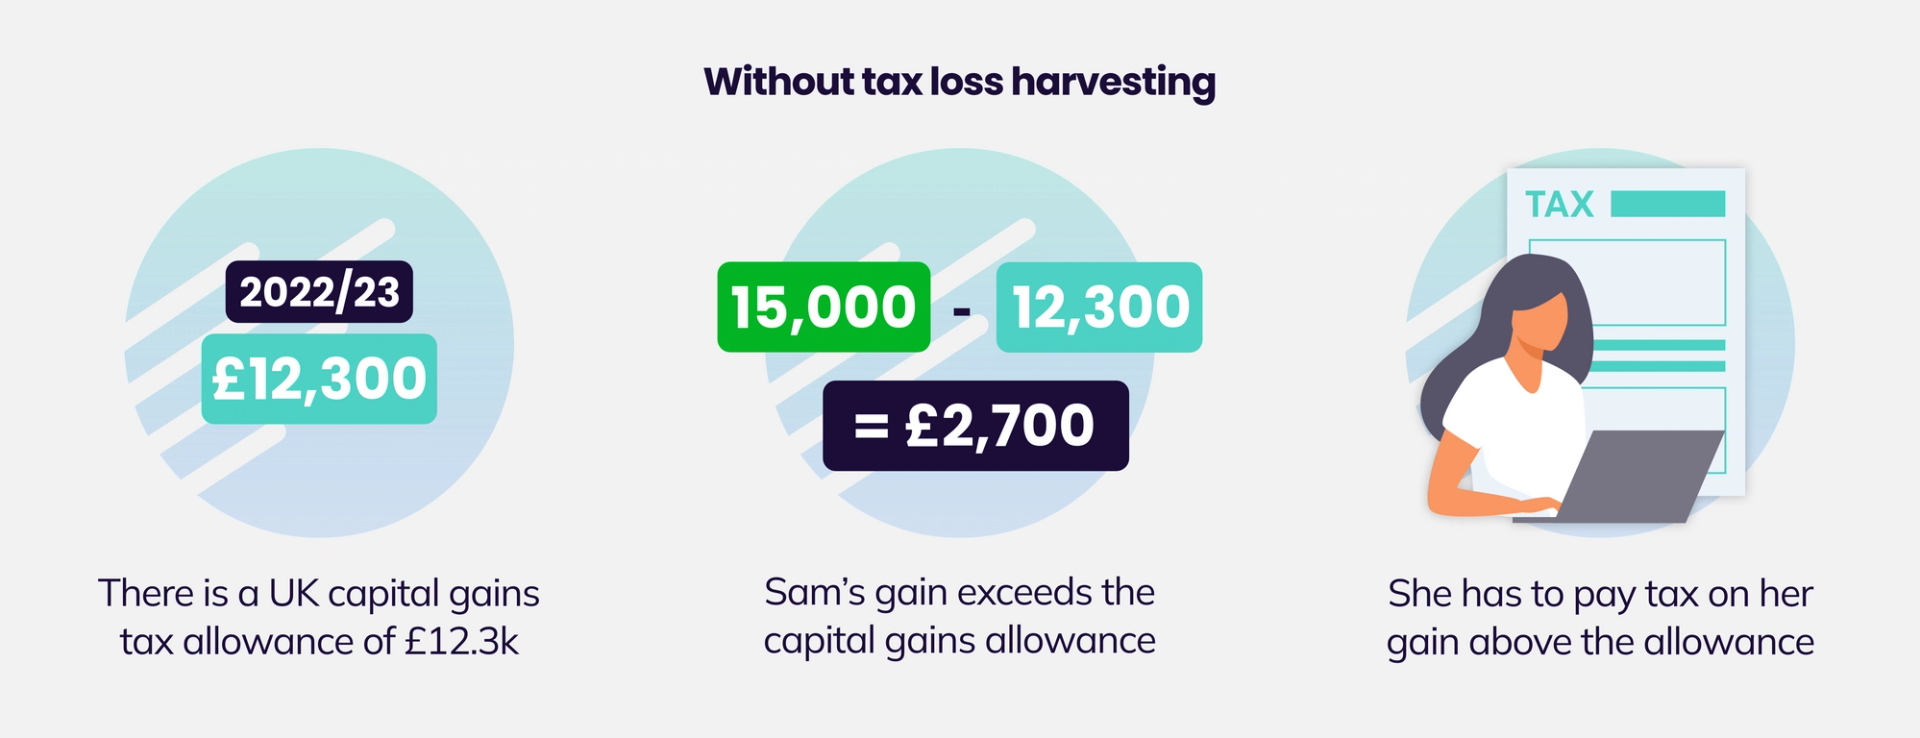 Without tax loss harvesting